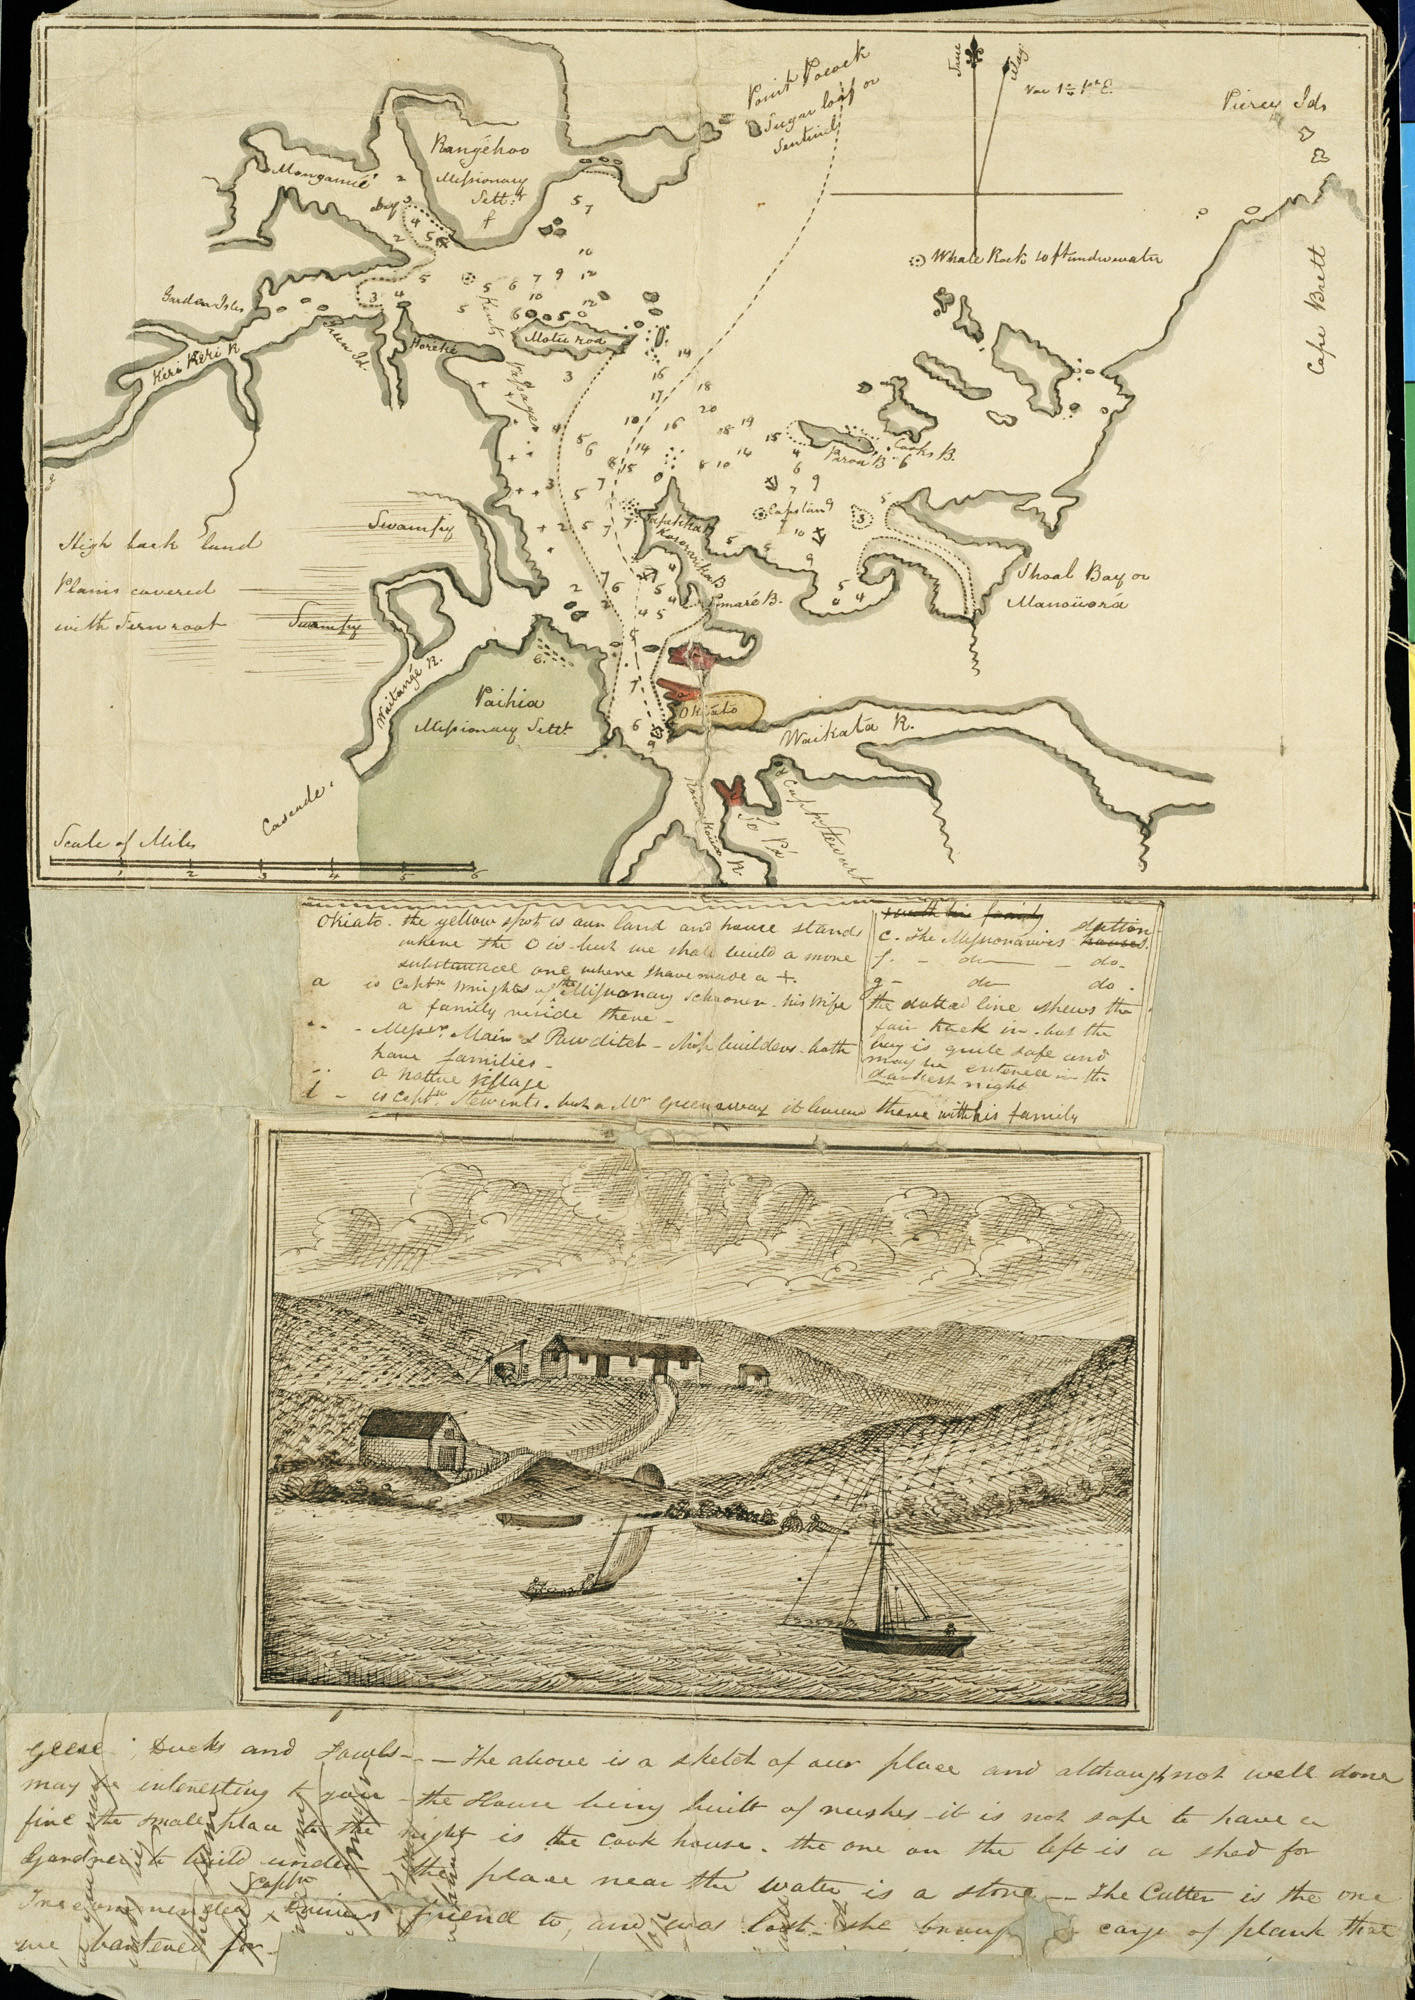 Manuscript map and sketch of property at Okiato, Bay of Islands. 1833. Auckland Libraries Heritage Collections, NZMS 849/1/8; Map 5449.